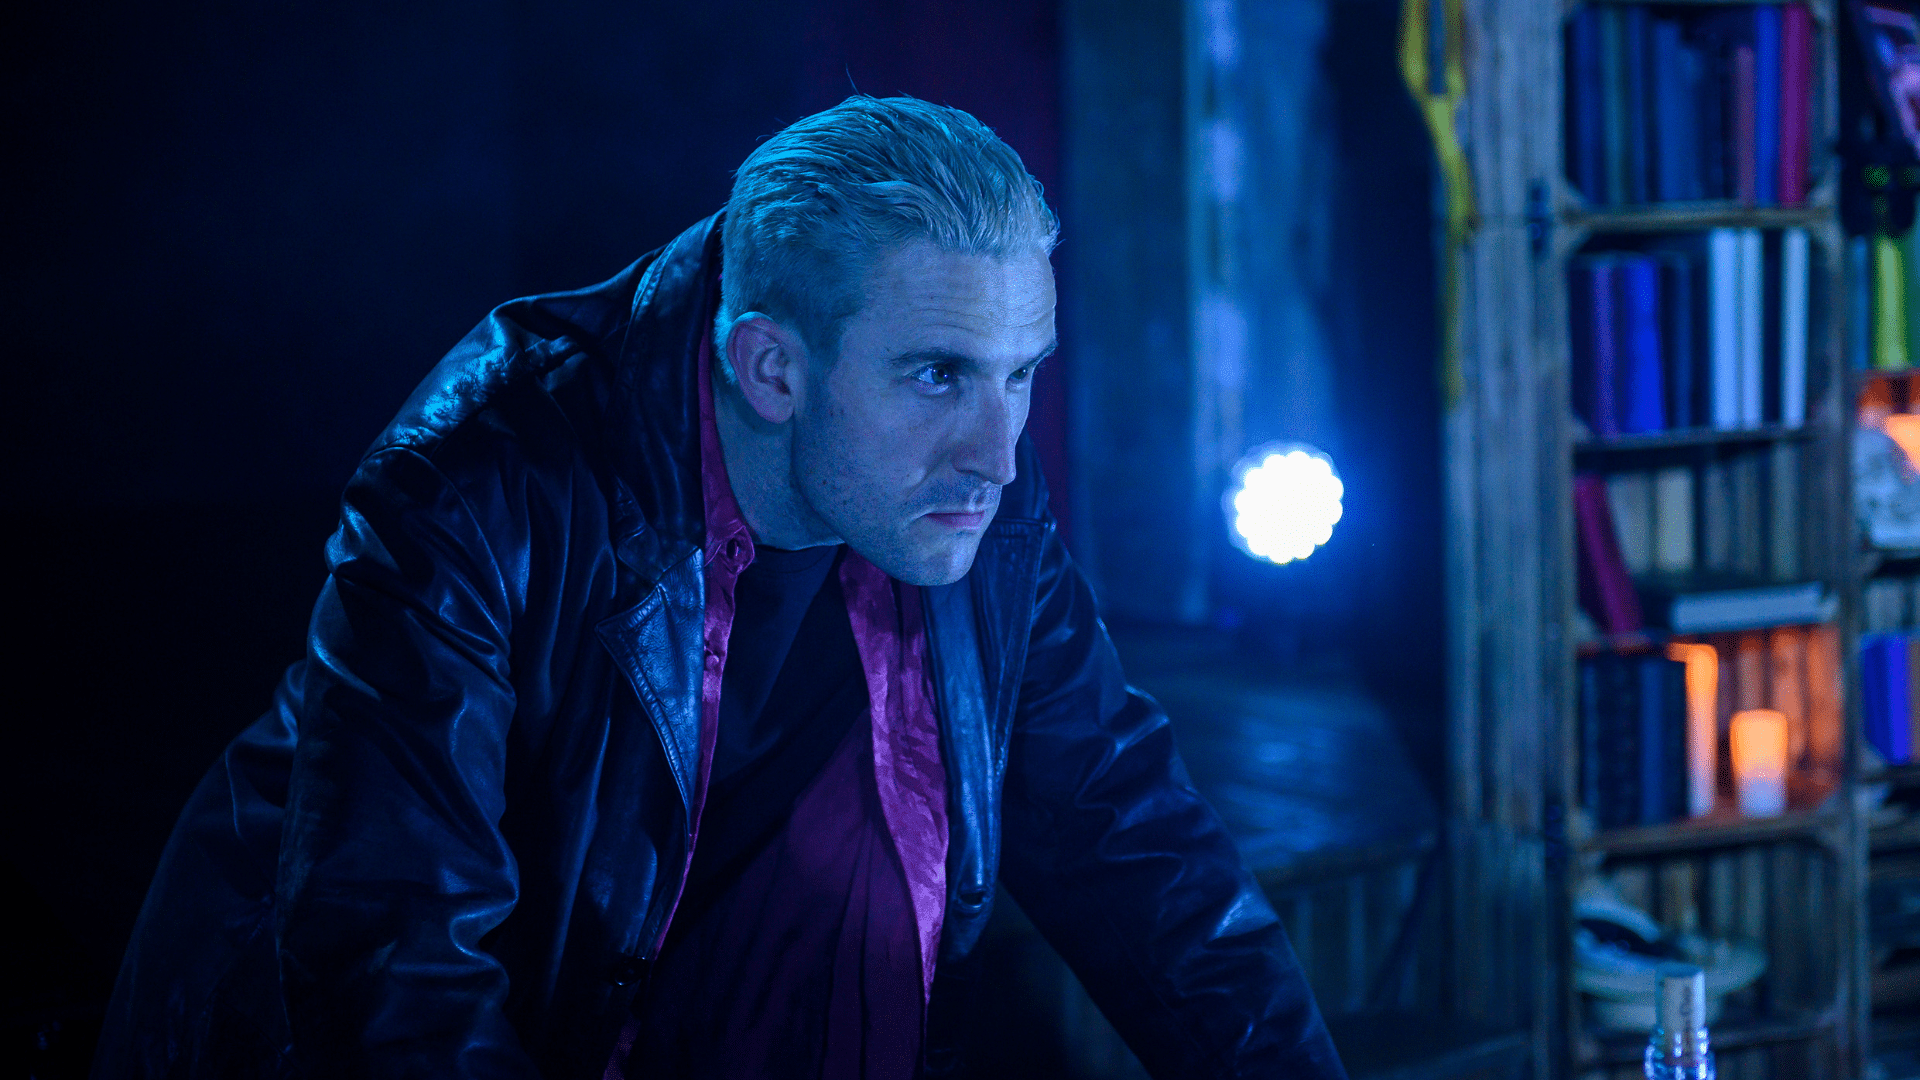 Buffy Revamped production photo - Brendan Murphy hunched over, looking to his left with a blank expression on his face. He is bathed in blue light. In the background there is a bookshelf.